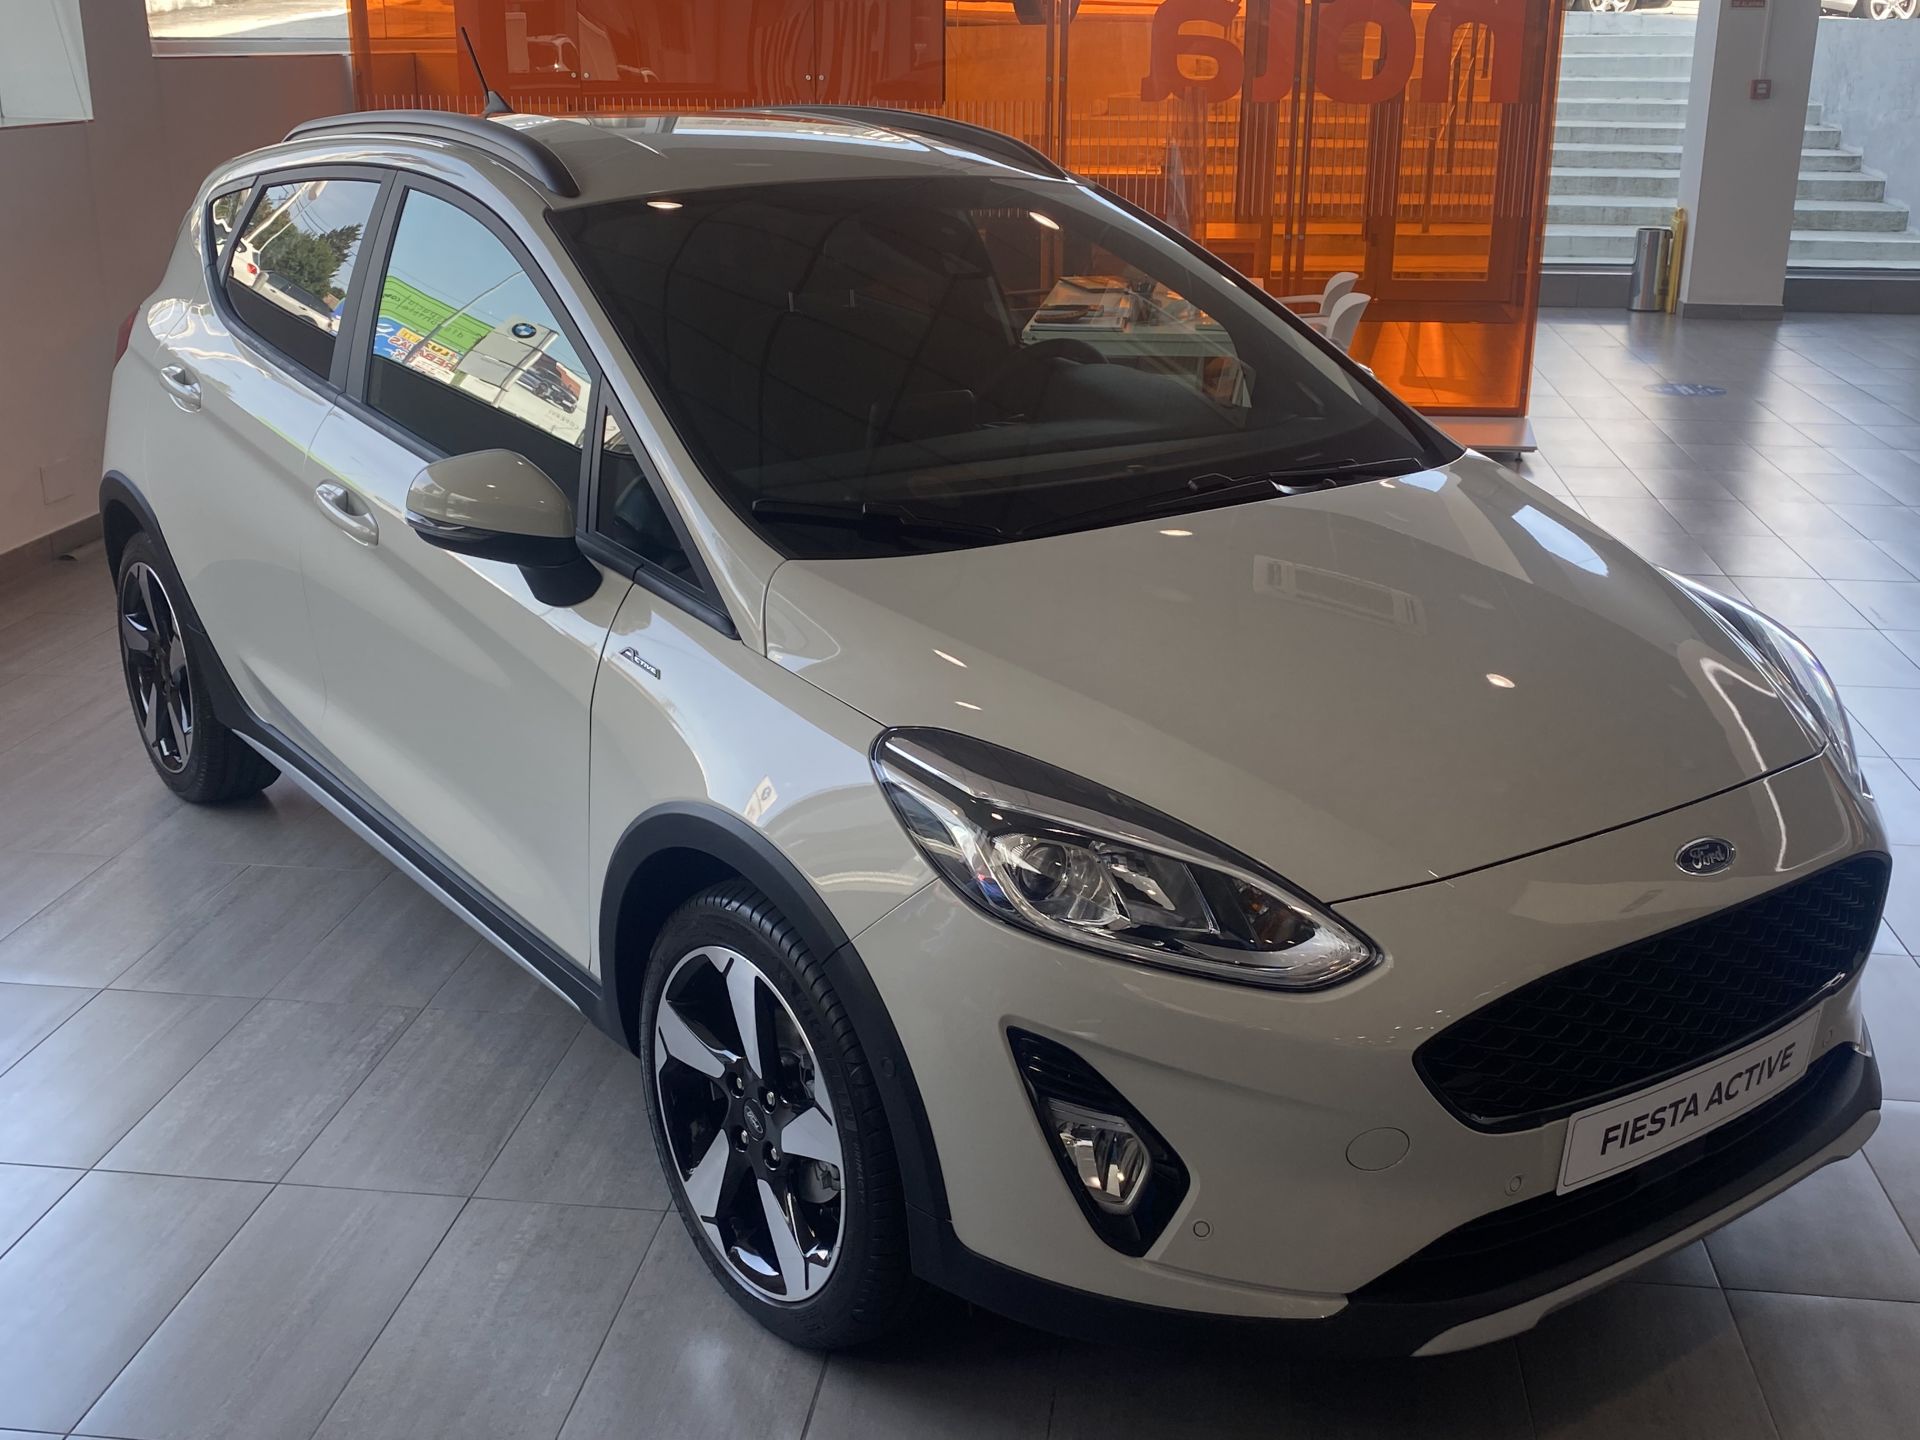 Ford Fiesta 1.0 EcoBoost 70kW (95CV) Active S/S 5p